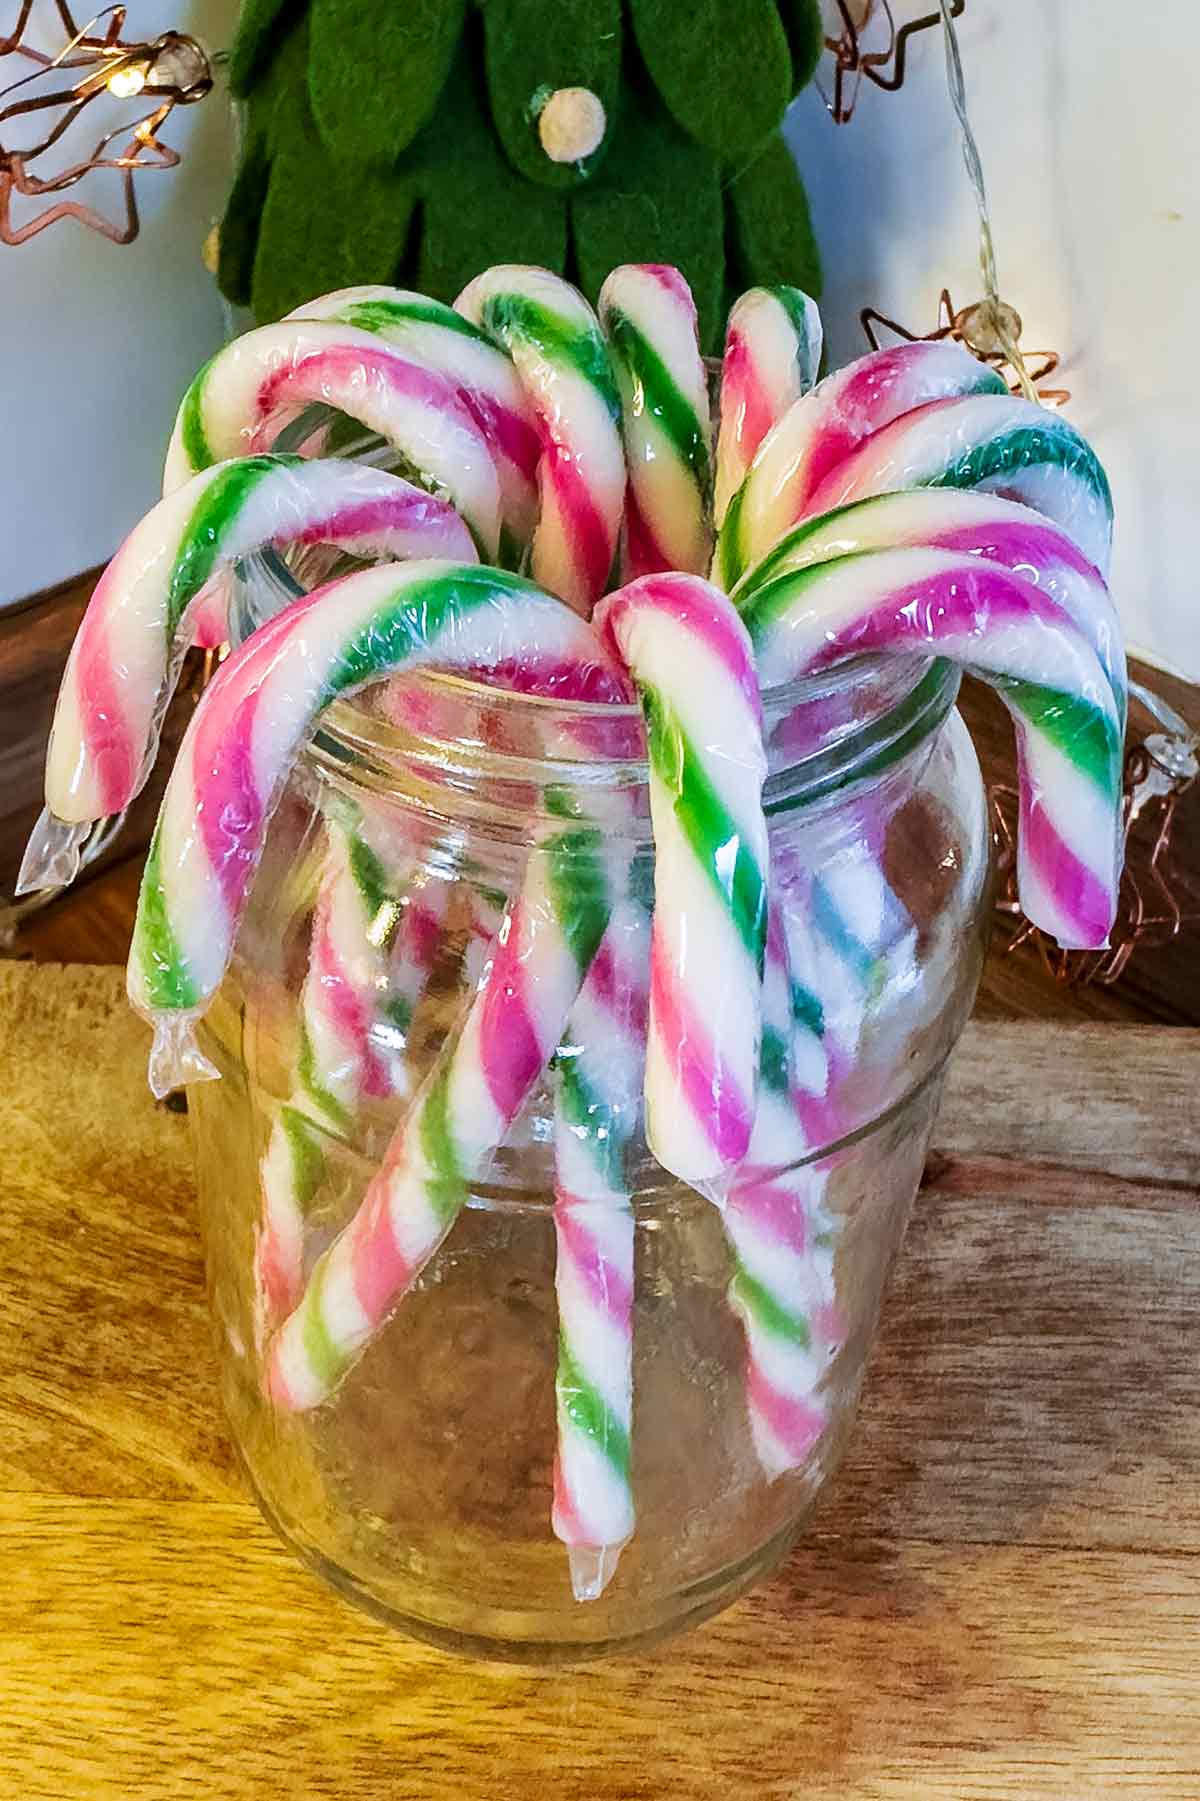 Candy canes arranged in a glass jar.